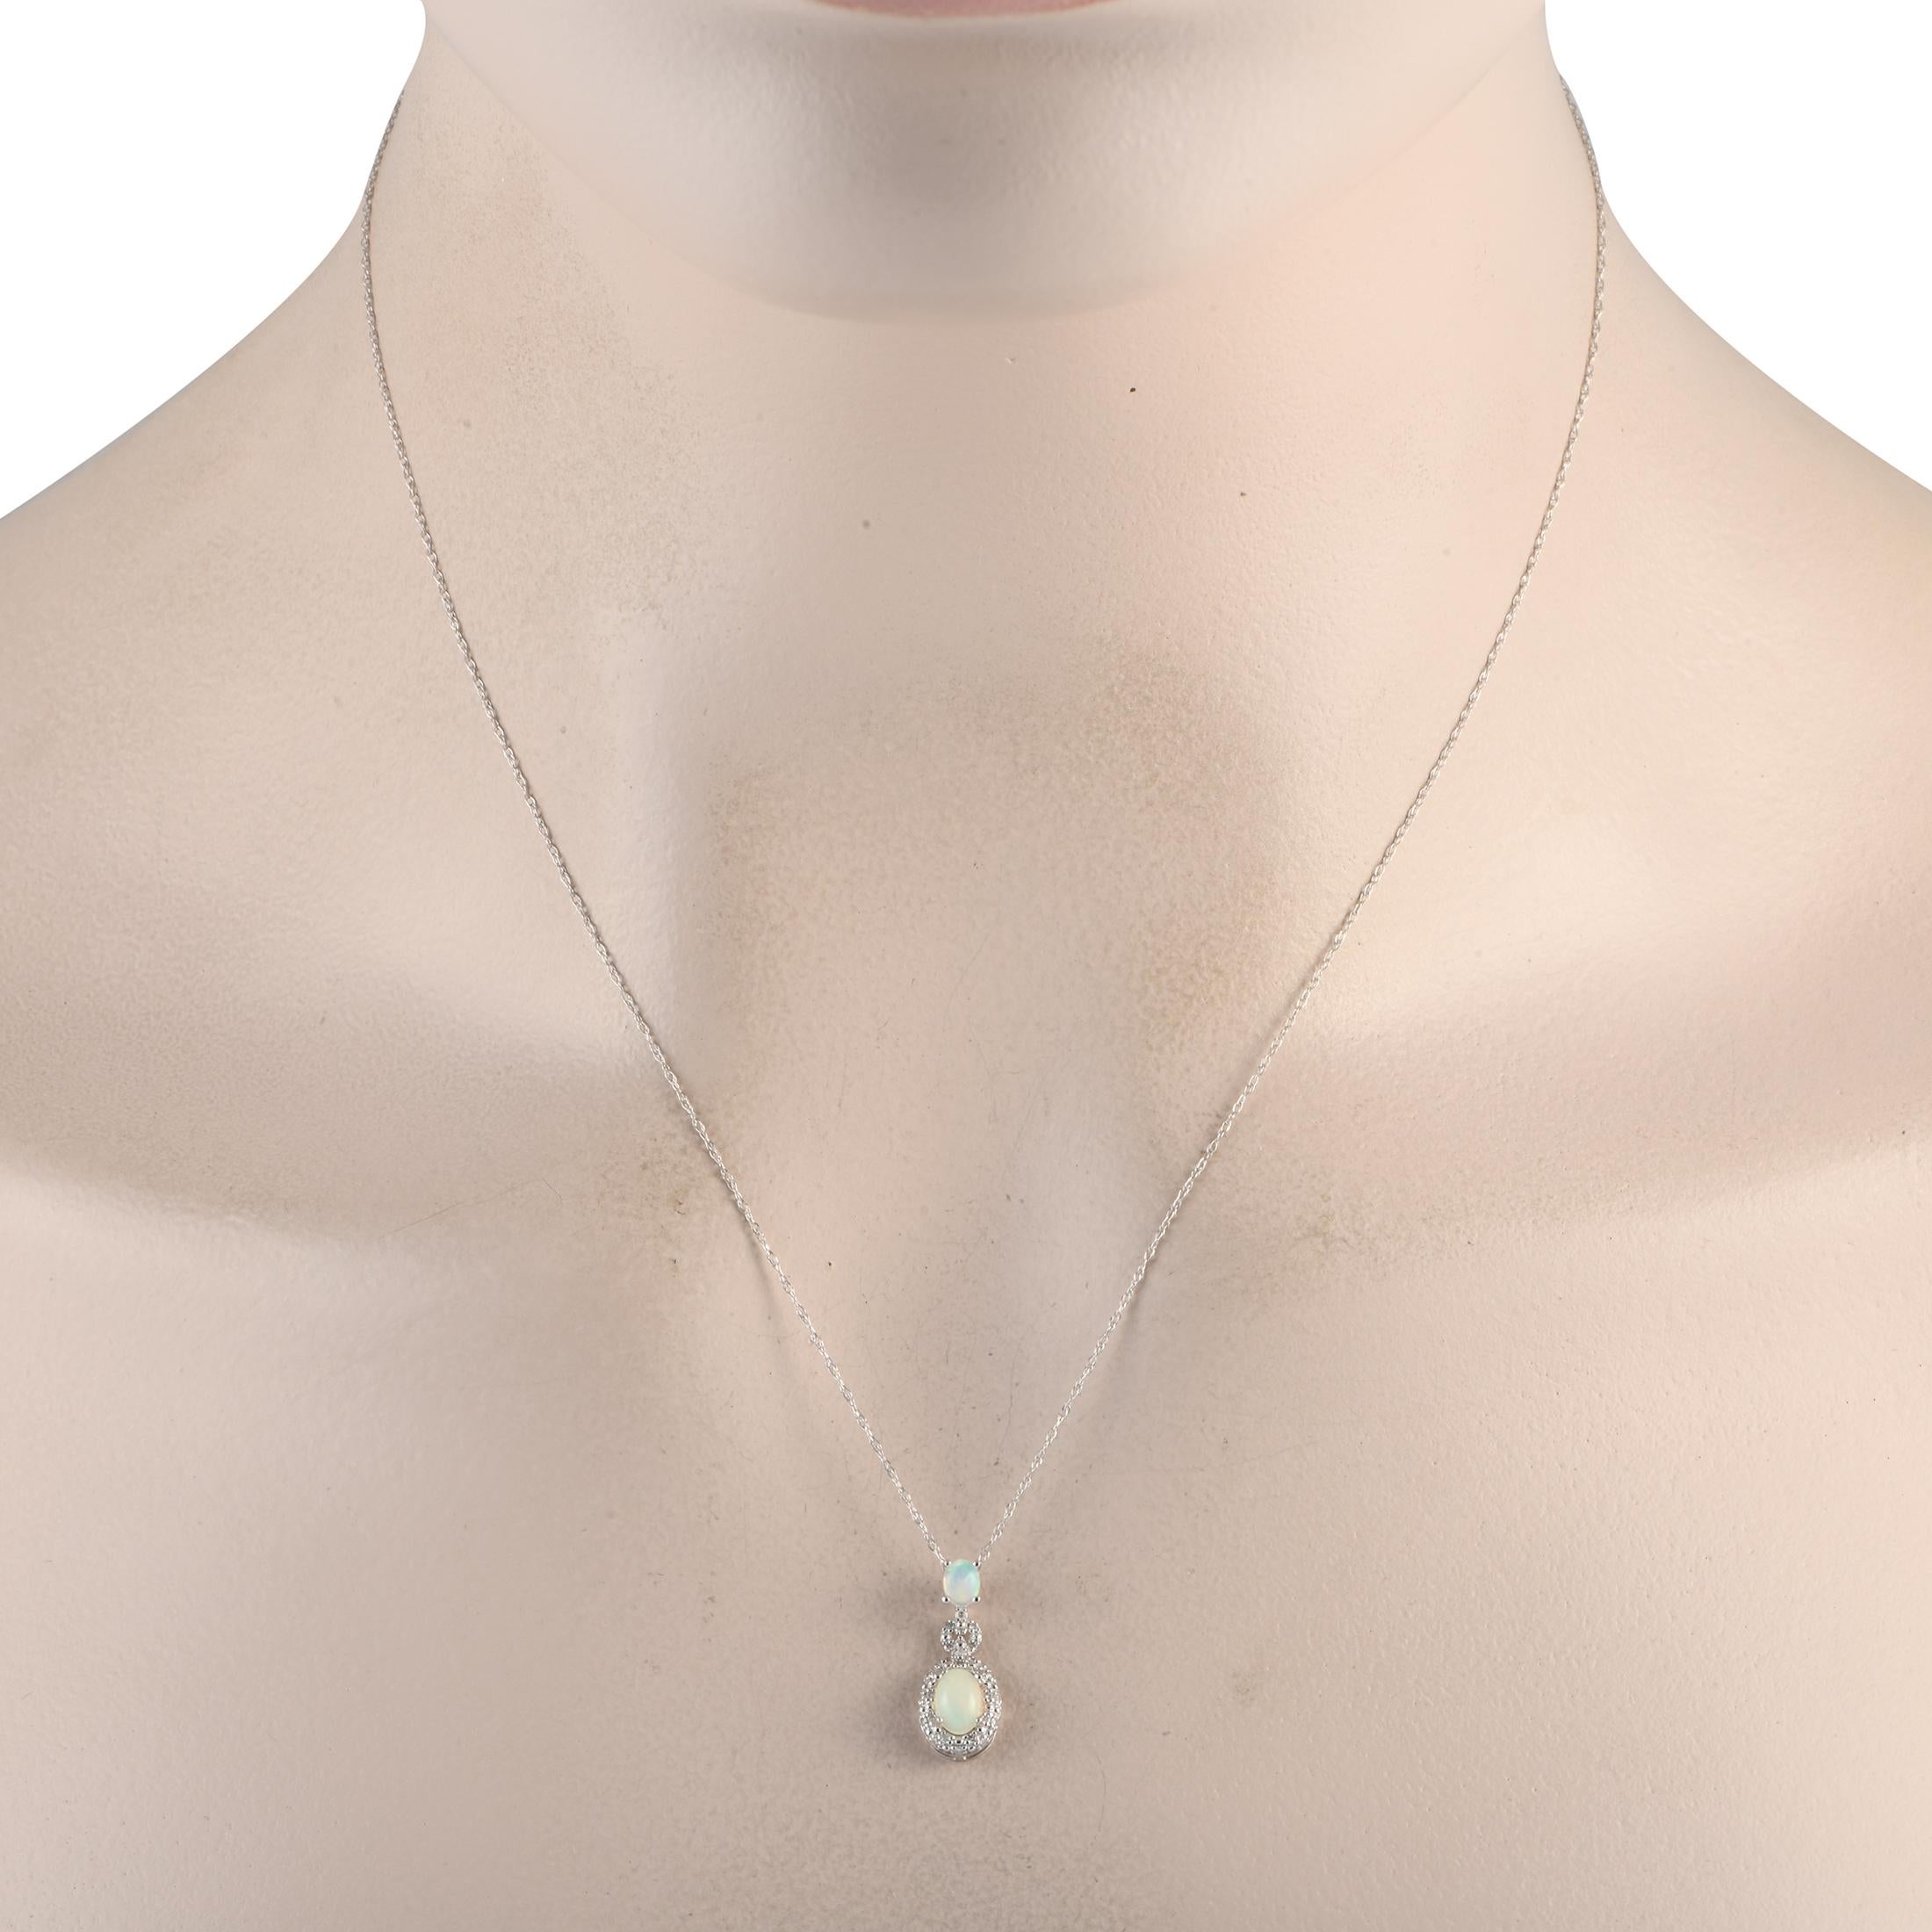 This luxurious necklace is incredibly sophisticated. Suspended from an 18 chain, youll find an elegant 14K white gold pendant measuring 0.75 long by 0.25 wide. A pair of radiant opals elevate this dynamic design, while sparkling diamonds totaling